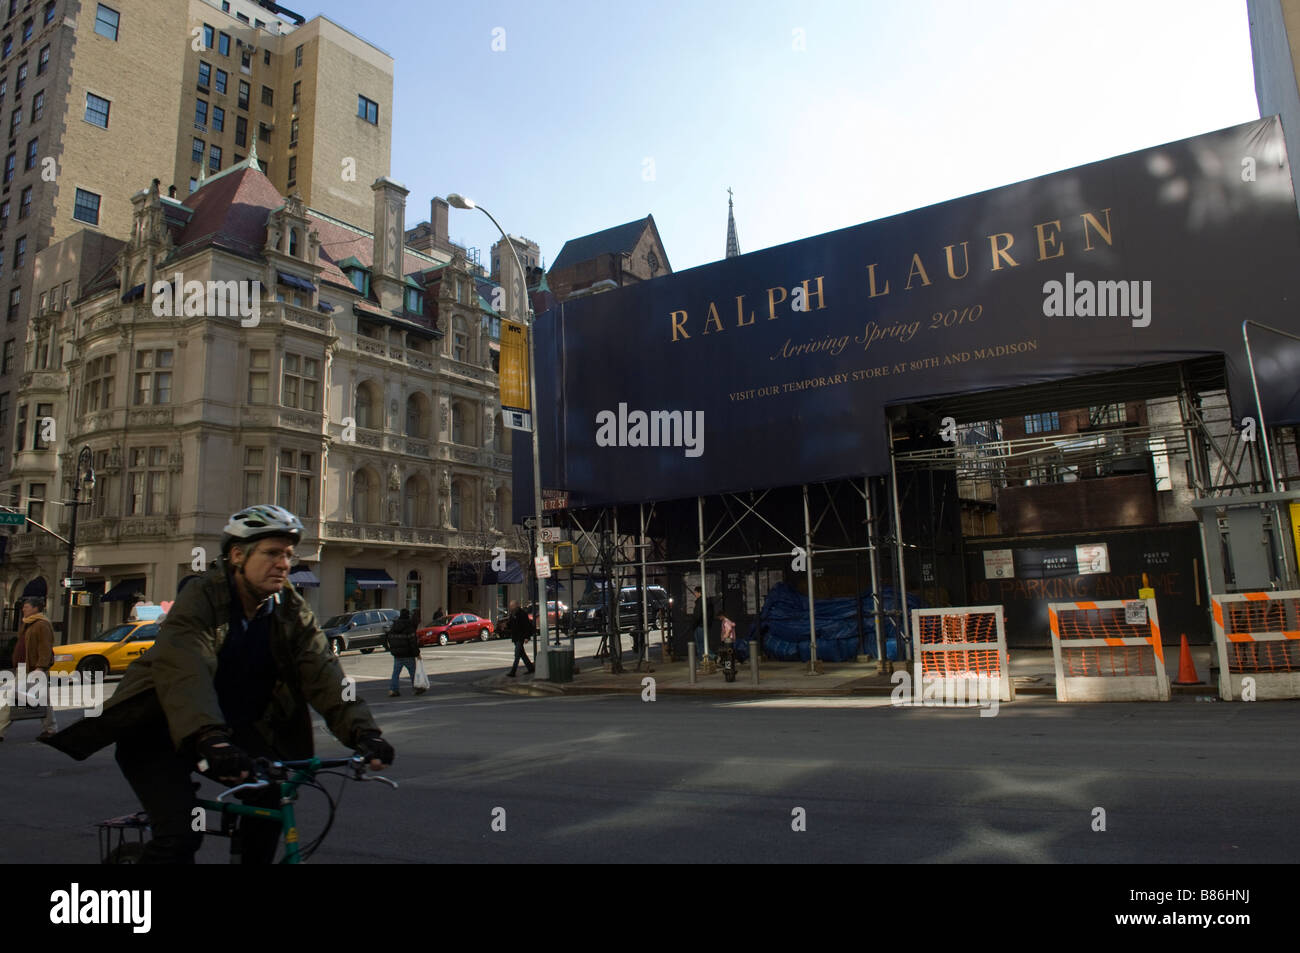 The Ralph Lauren stores on Madison Avenue in New York Stock Photo: 22273262 - Alamy